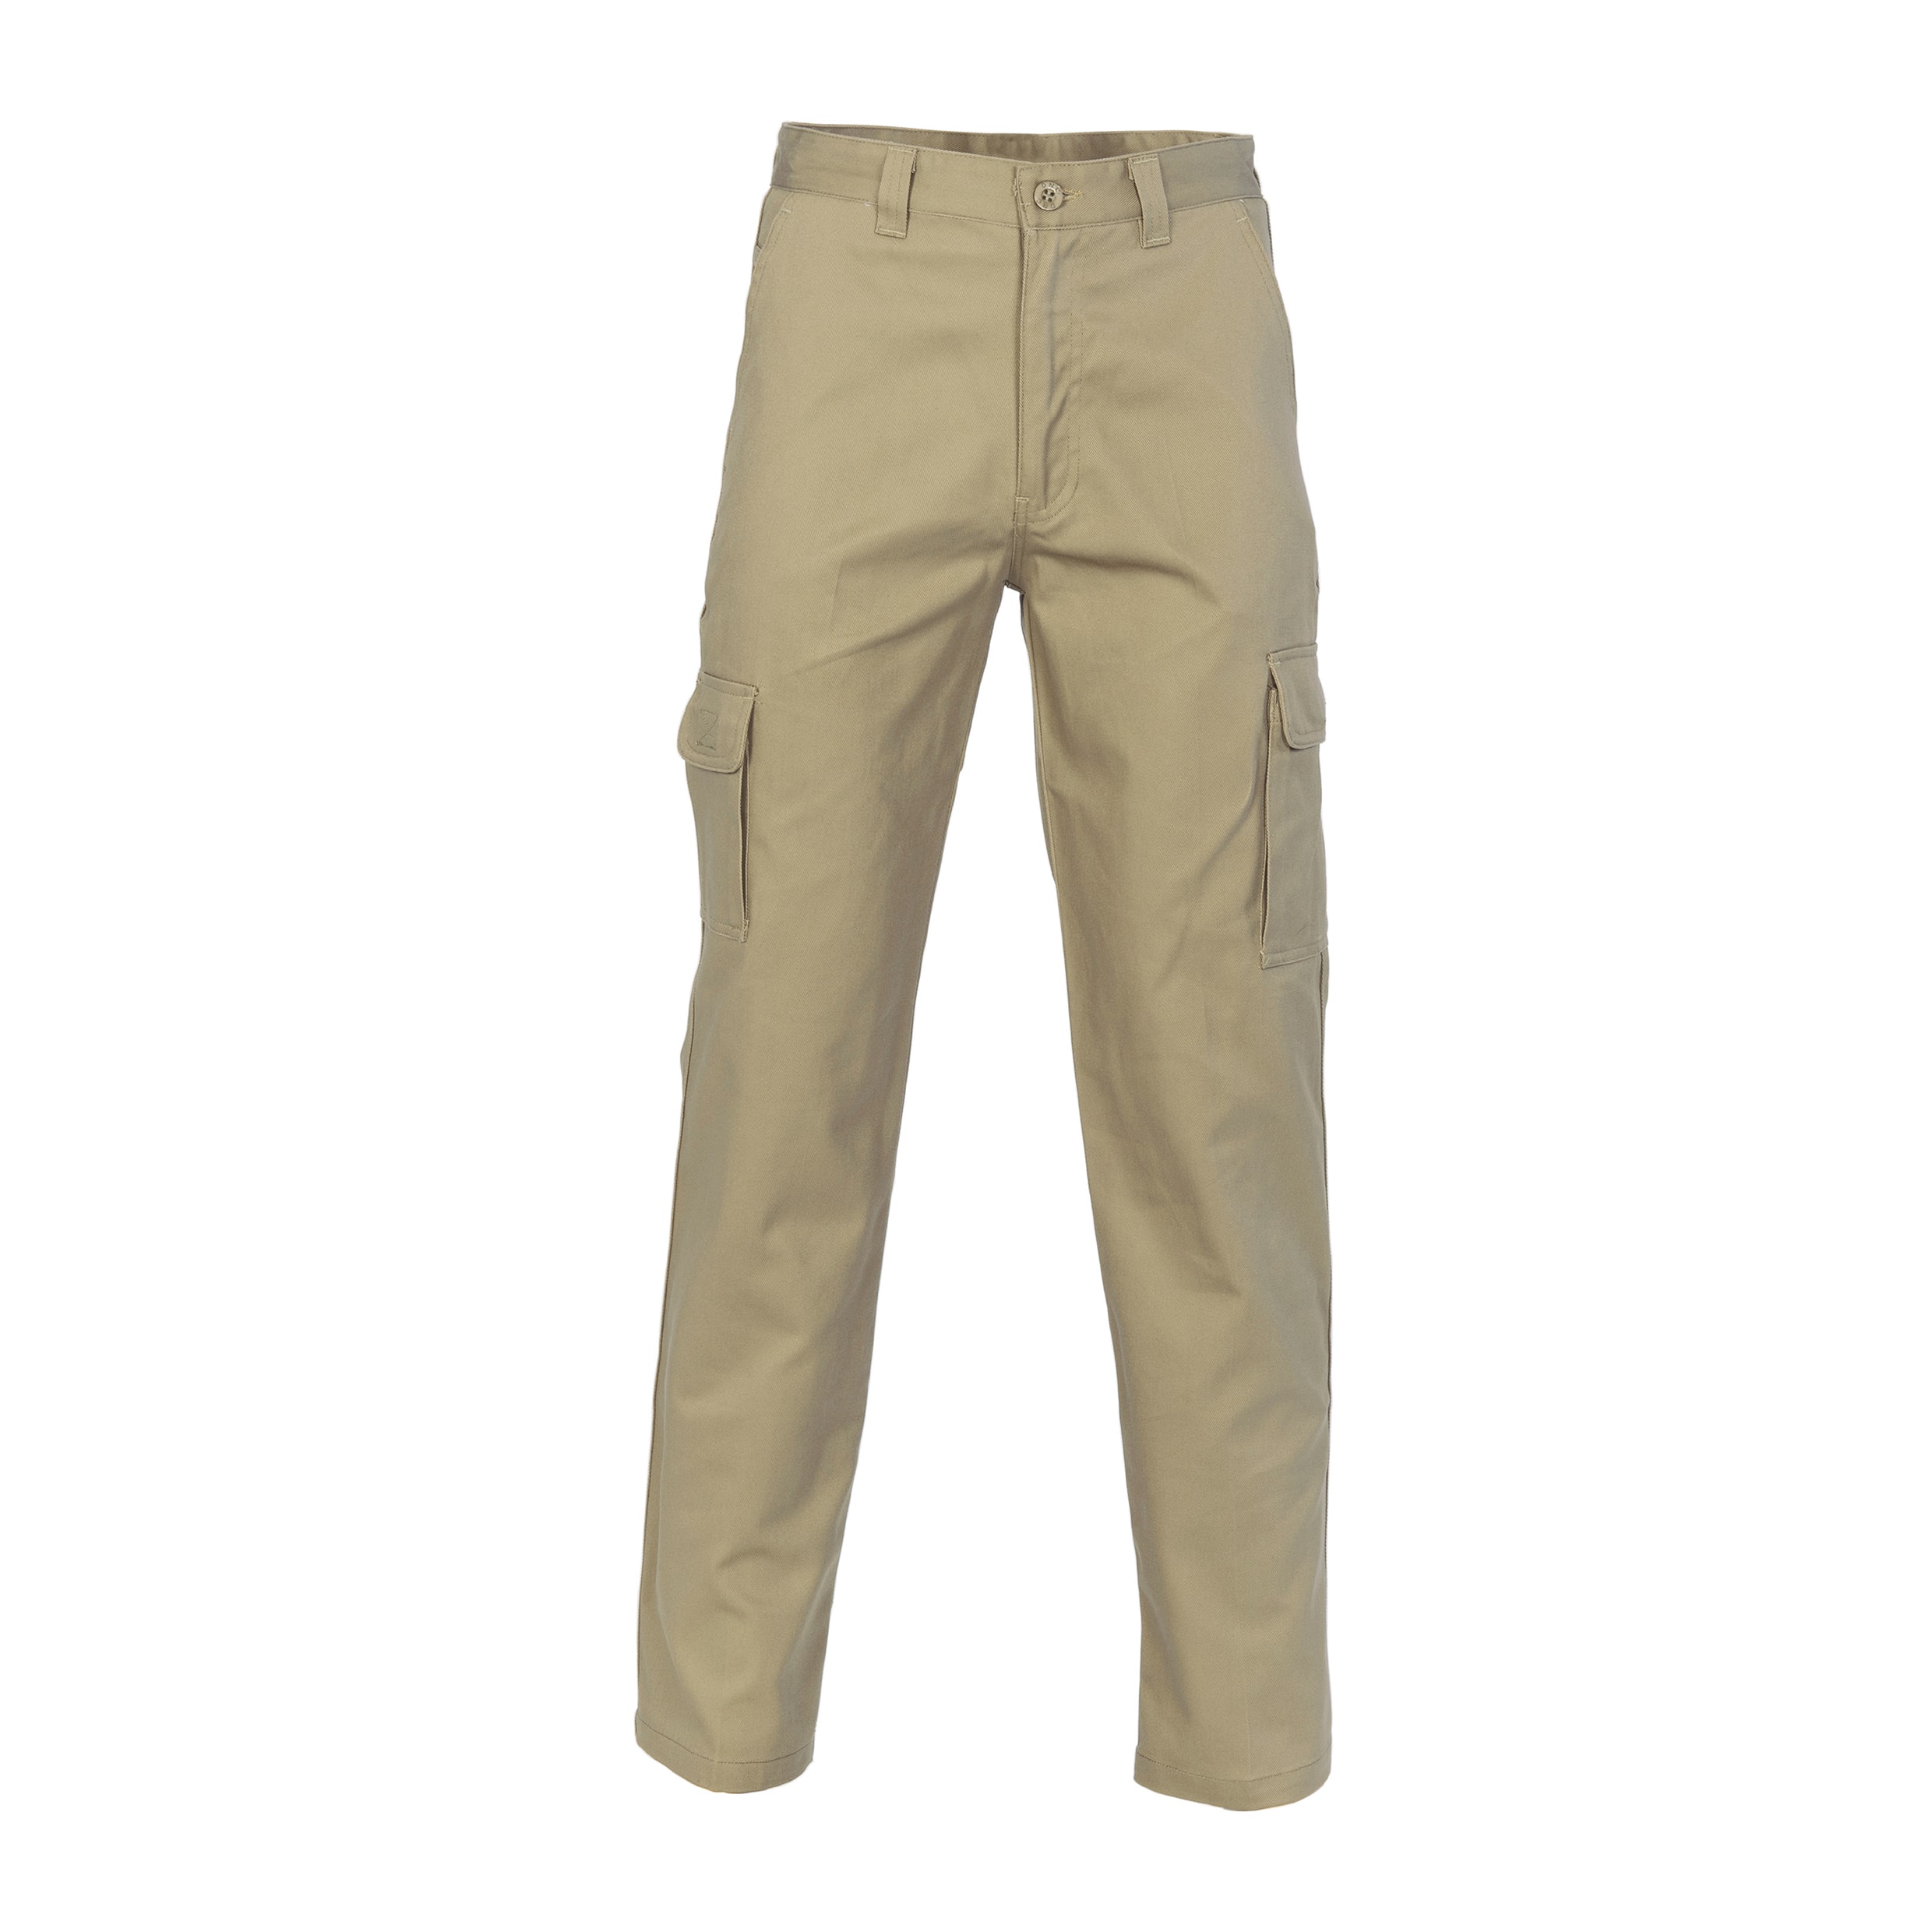 3312 Dnc Cotton Drill Cargo Pants - Max Global Products